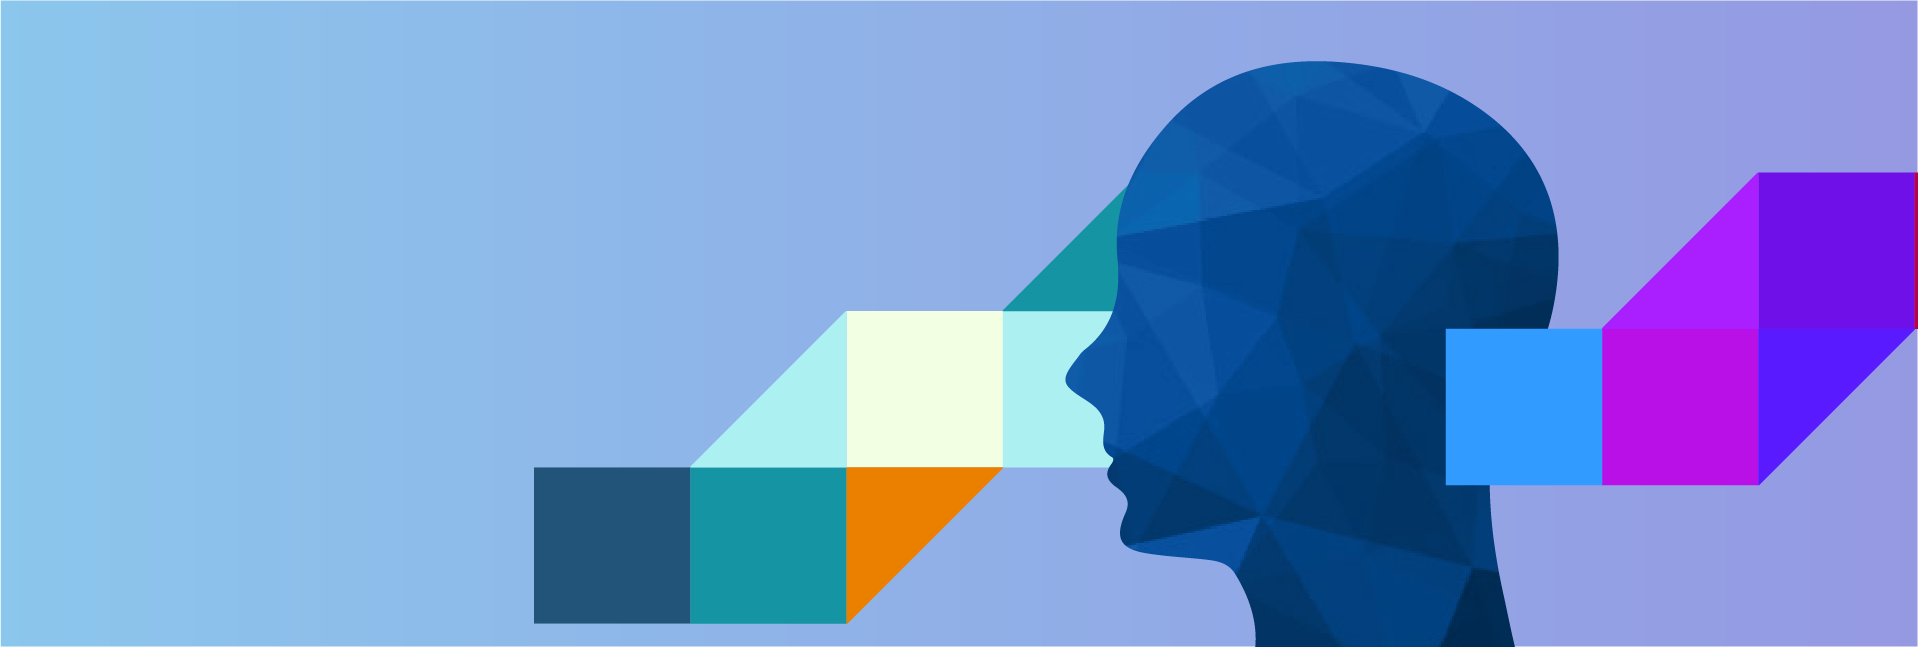 An abstract person is seen in profile while colorful blocks are shown emerging from their face